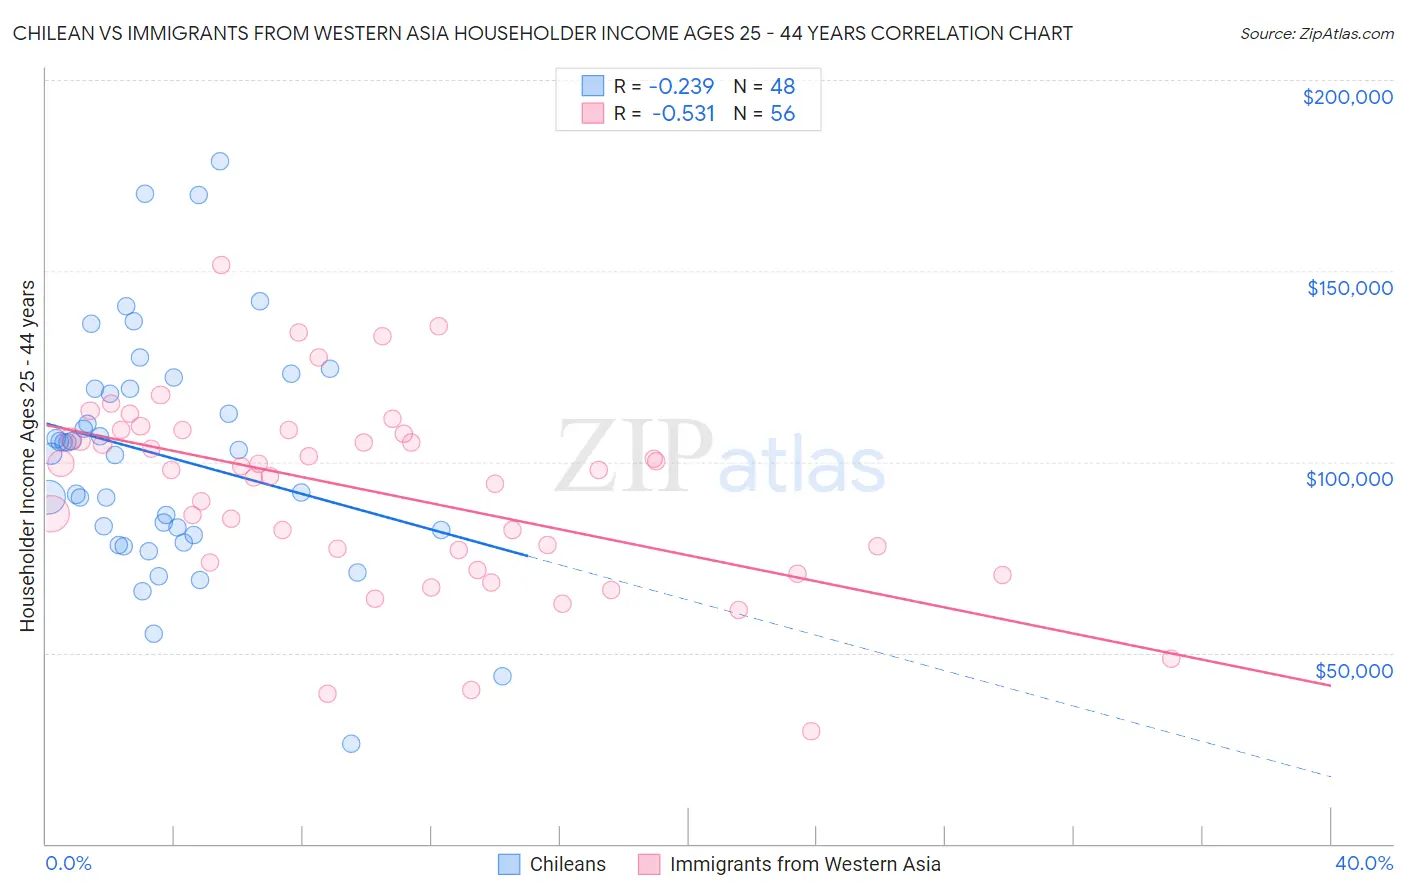 Chilean vs Immigrants from Western Asia Householder Income Ages 25 - 44 years